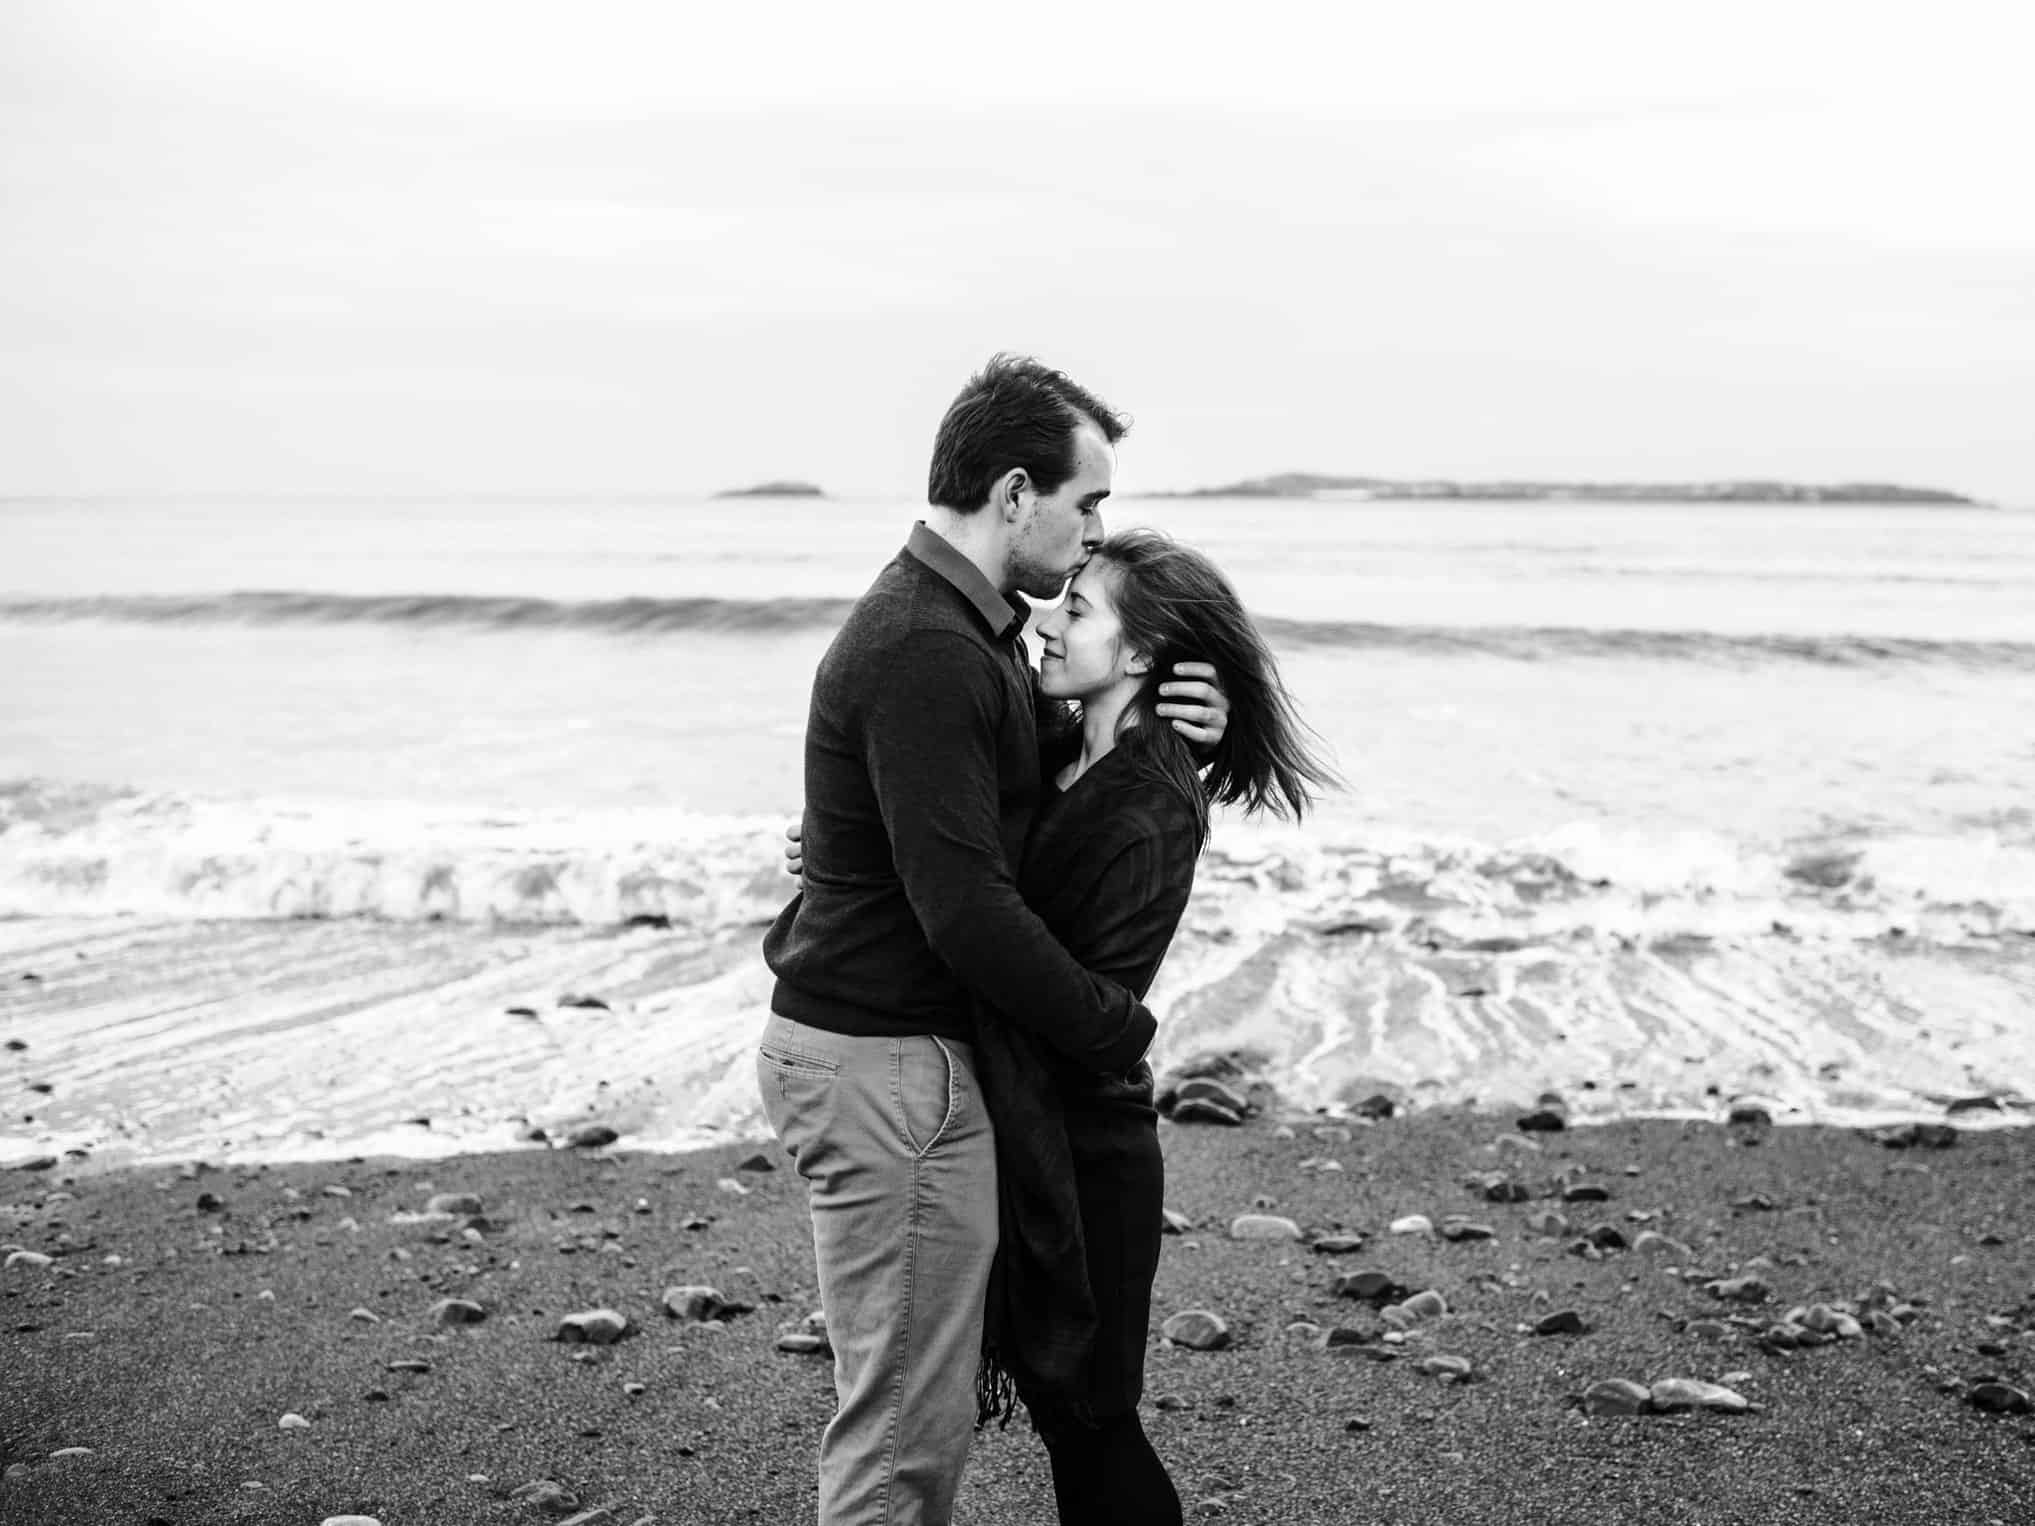 Our Engagement Photos - Part One